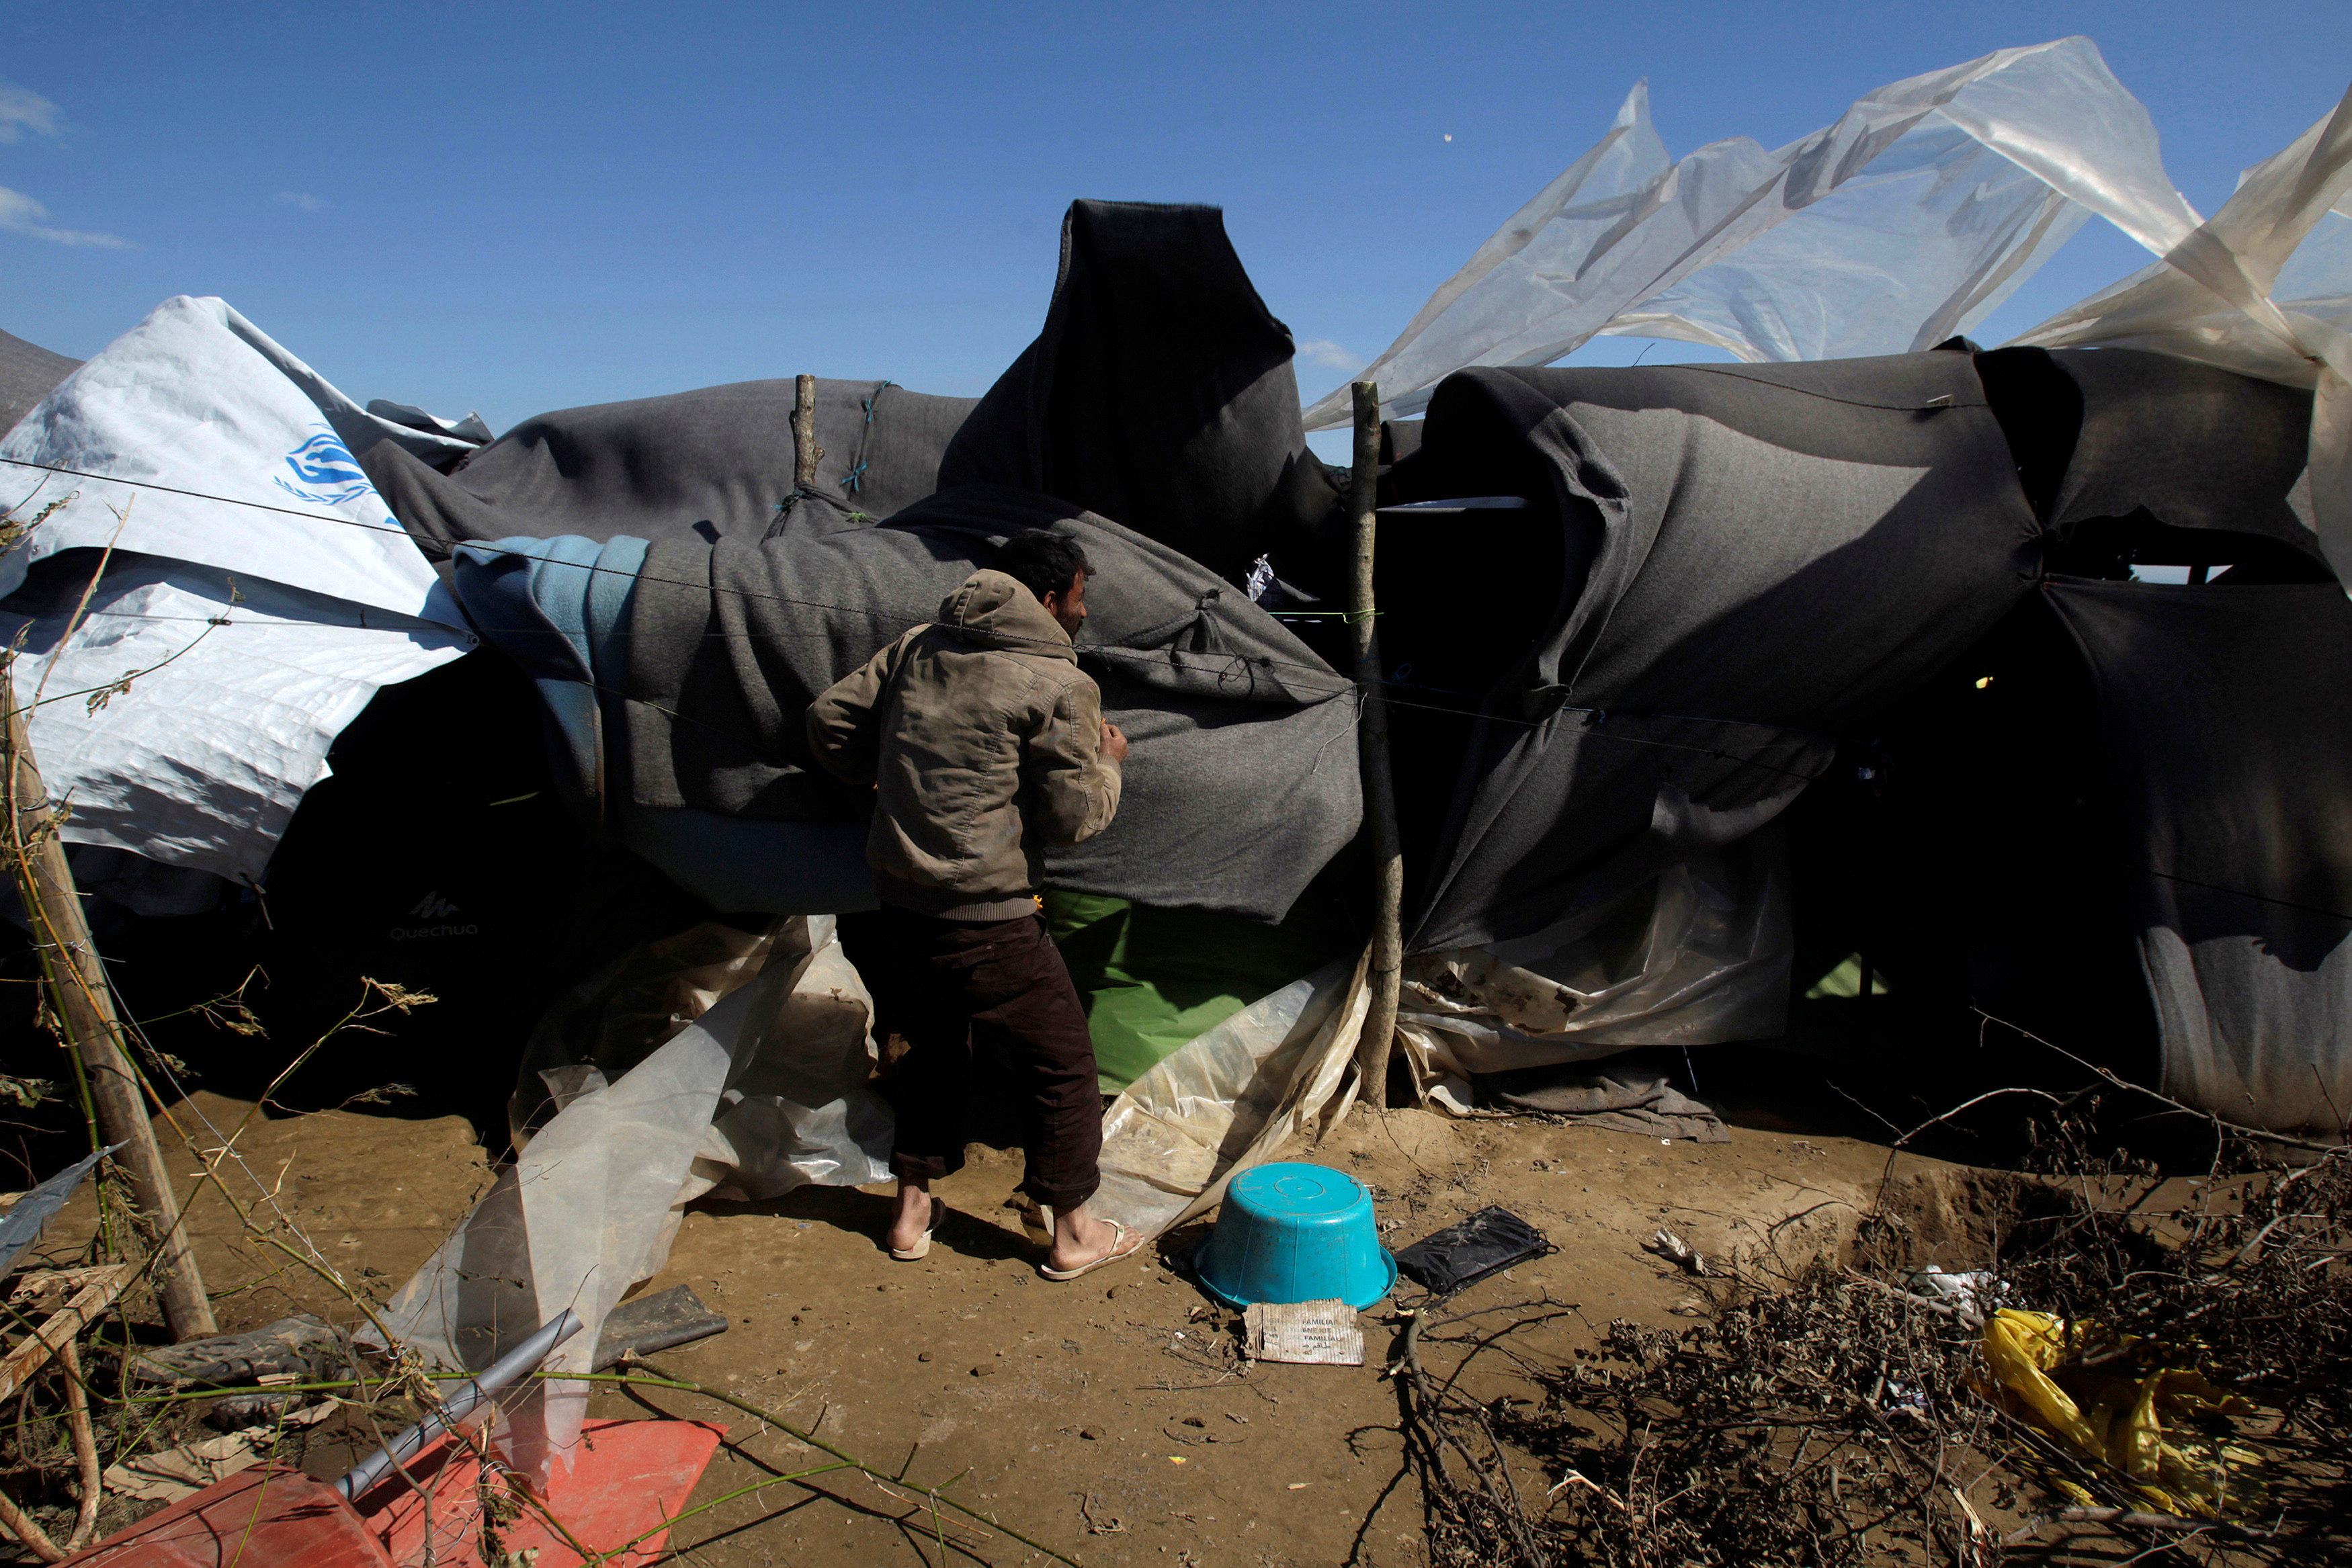 Conditions in Greece's refugee camps deteriorate every day.